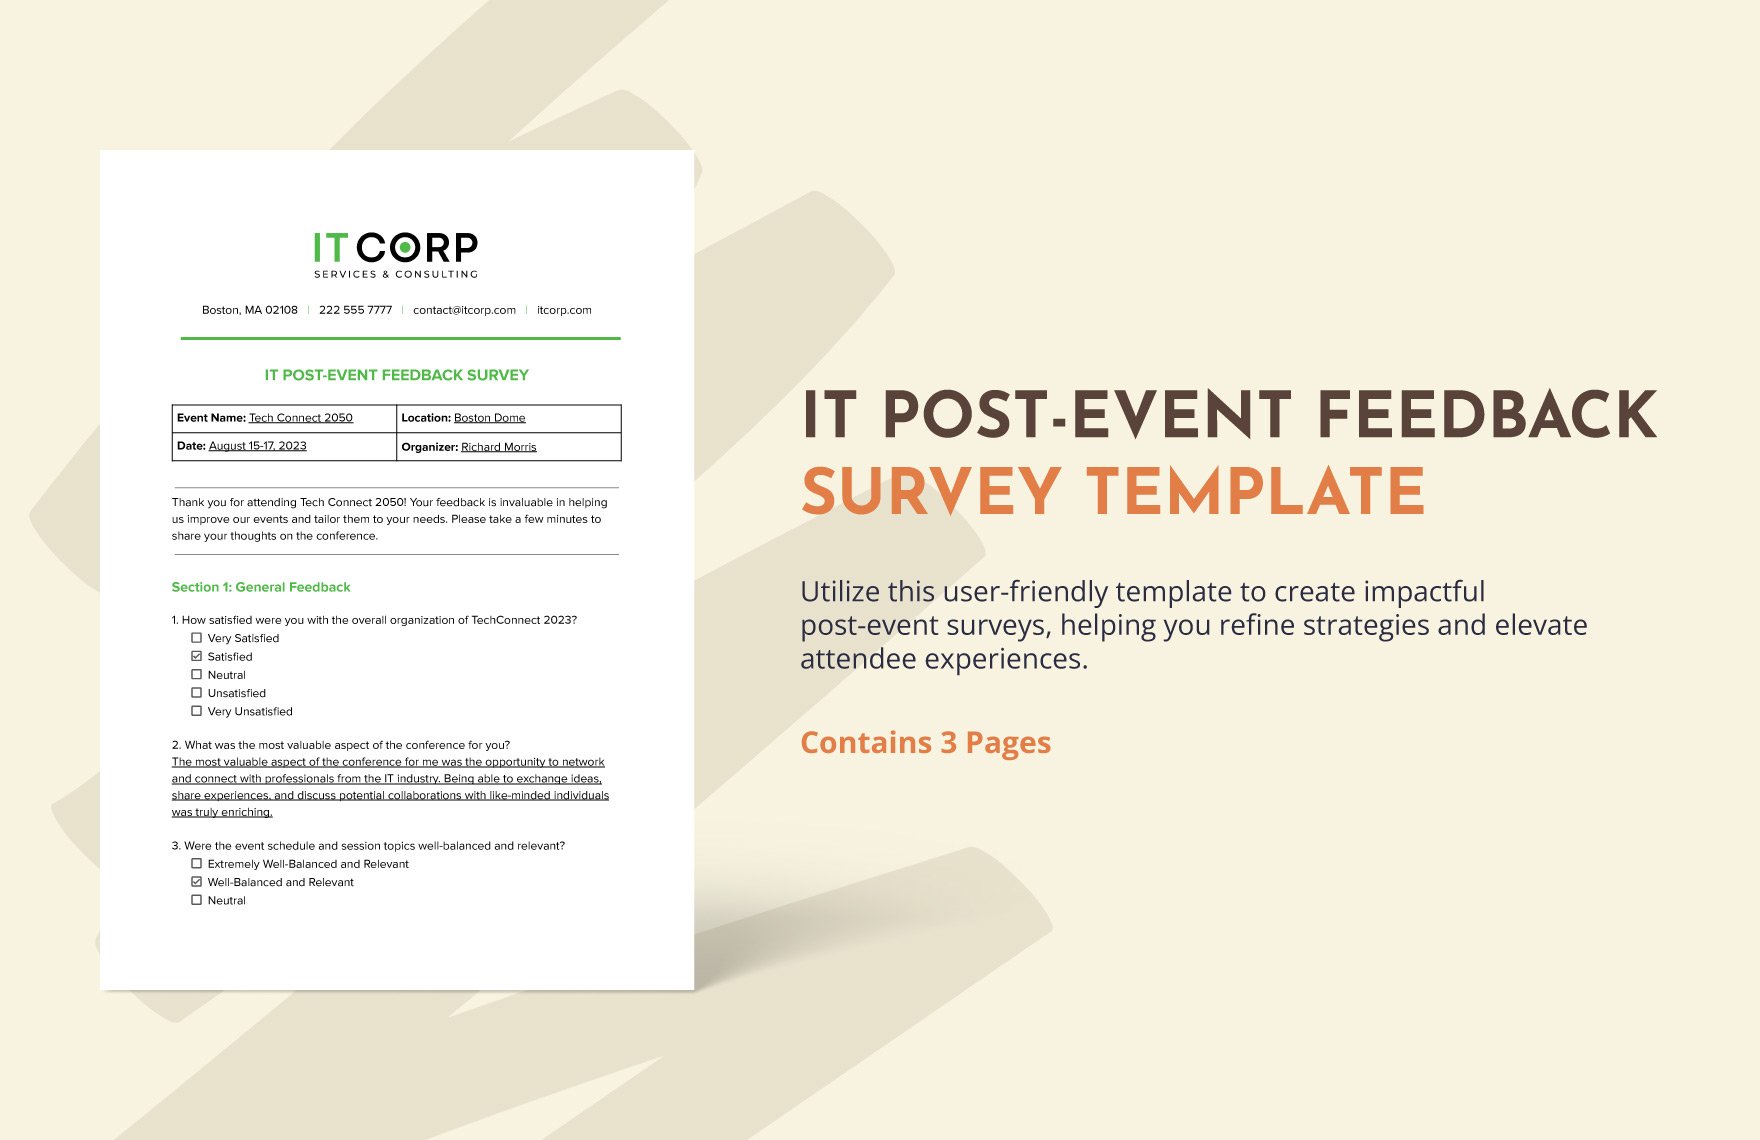 IT Post-Event Feedback Survey Template